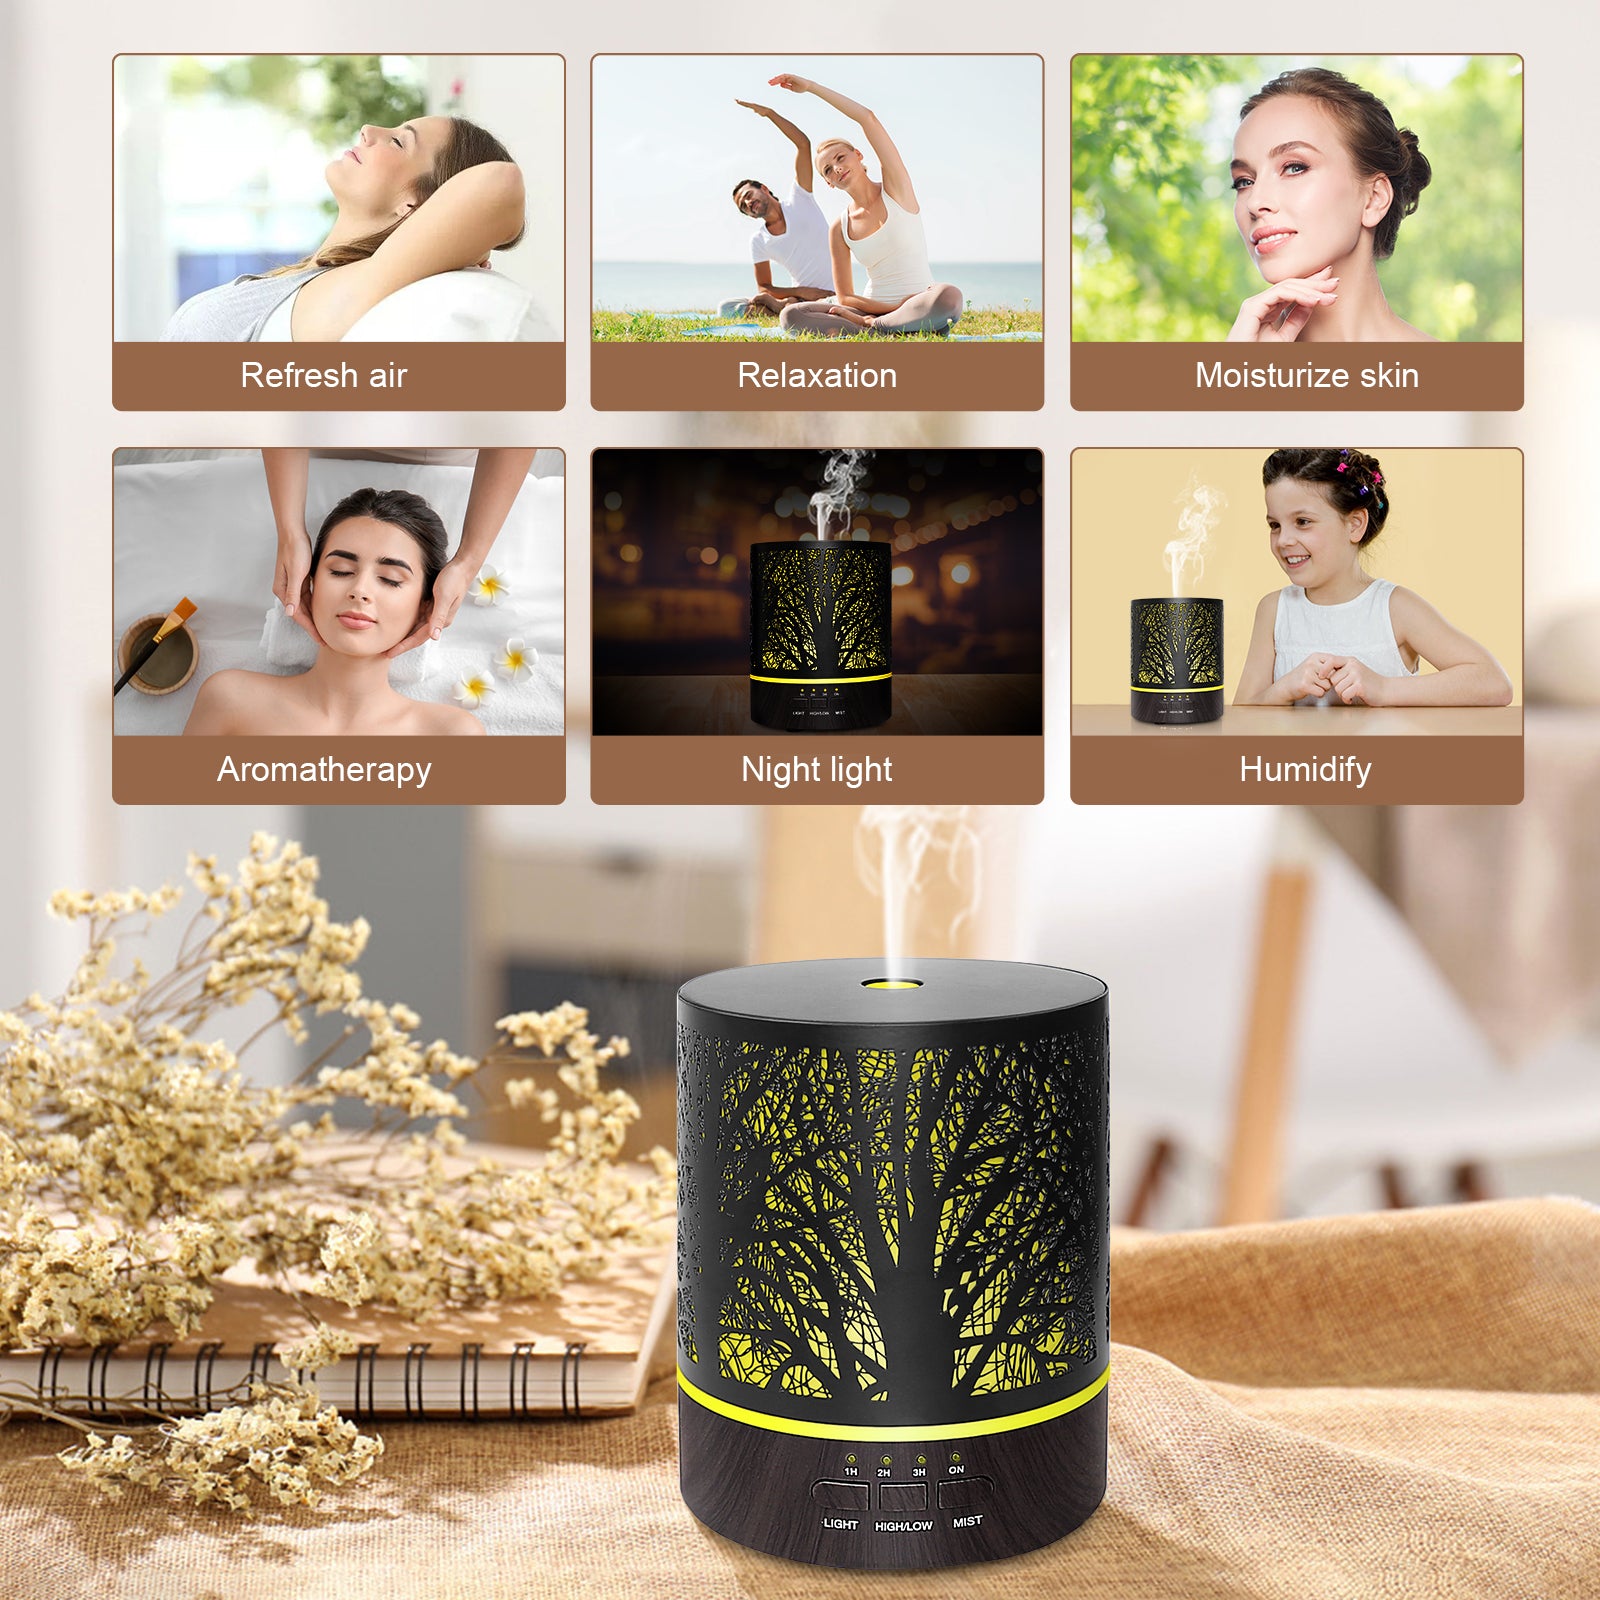 Naturalis Essence of Nature Mist Ultrasonic Aroma Diffuser & Humidifier with free Top 5 Natural Essential Oil - Naturalis